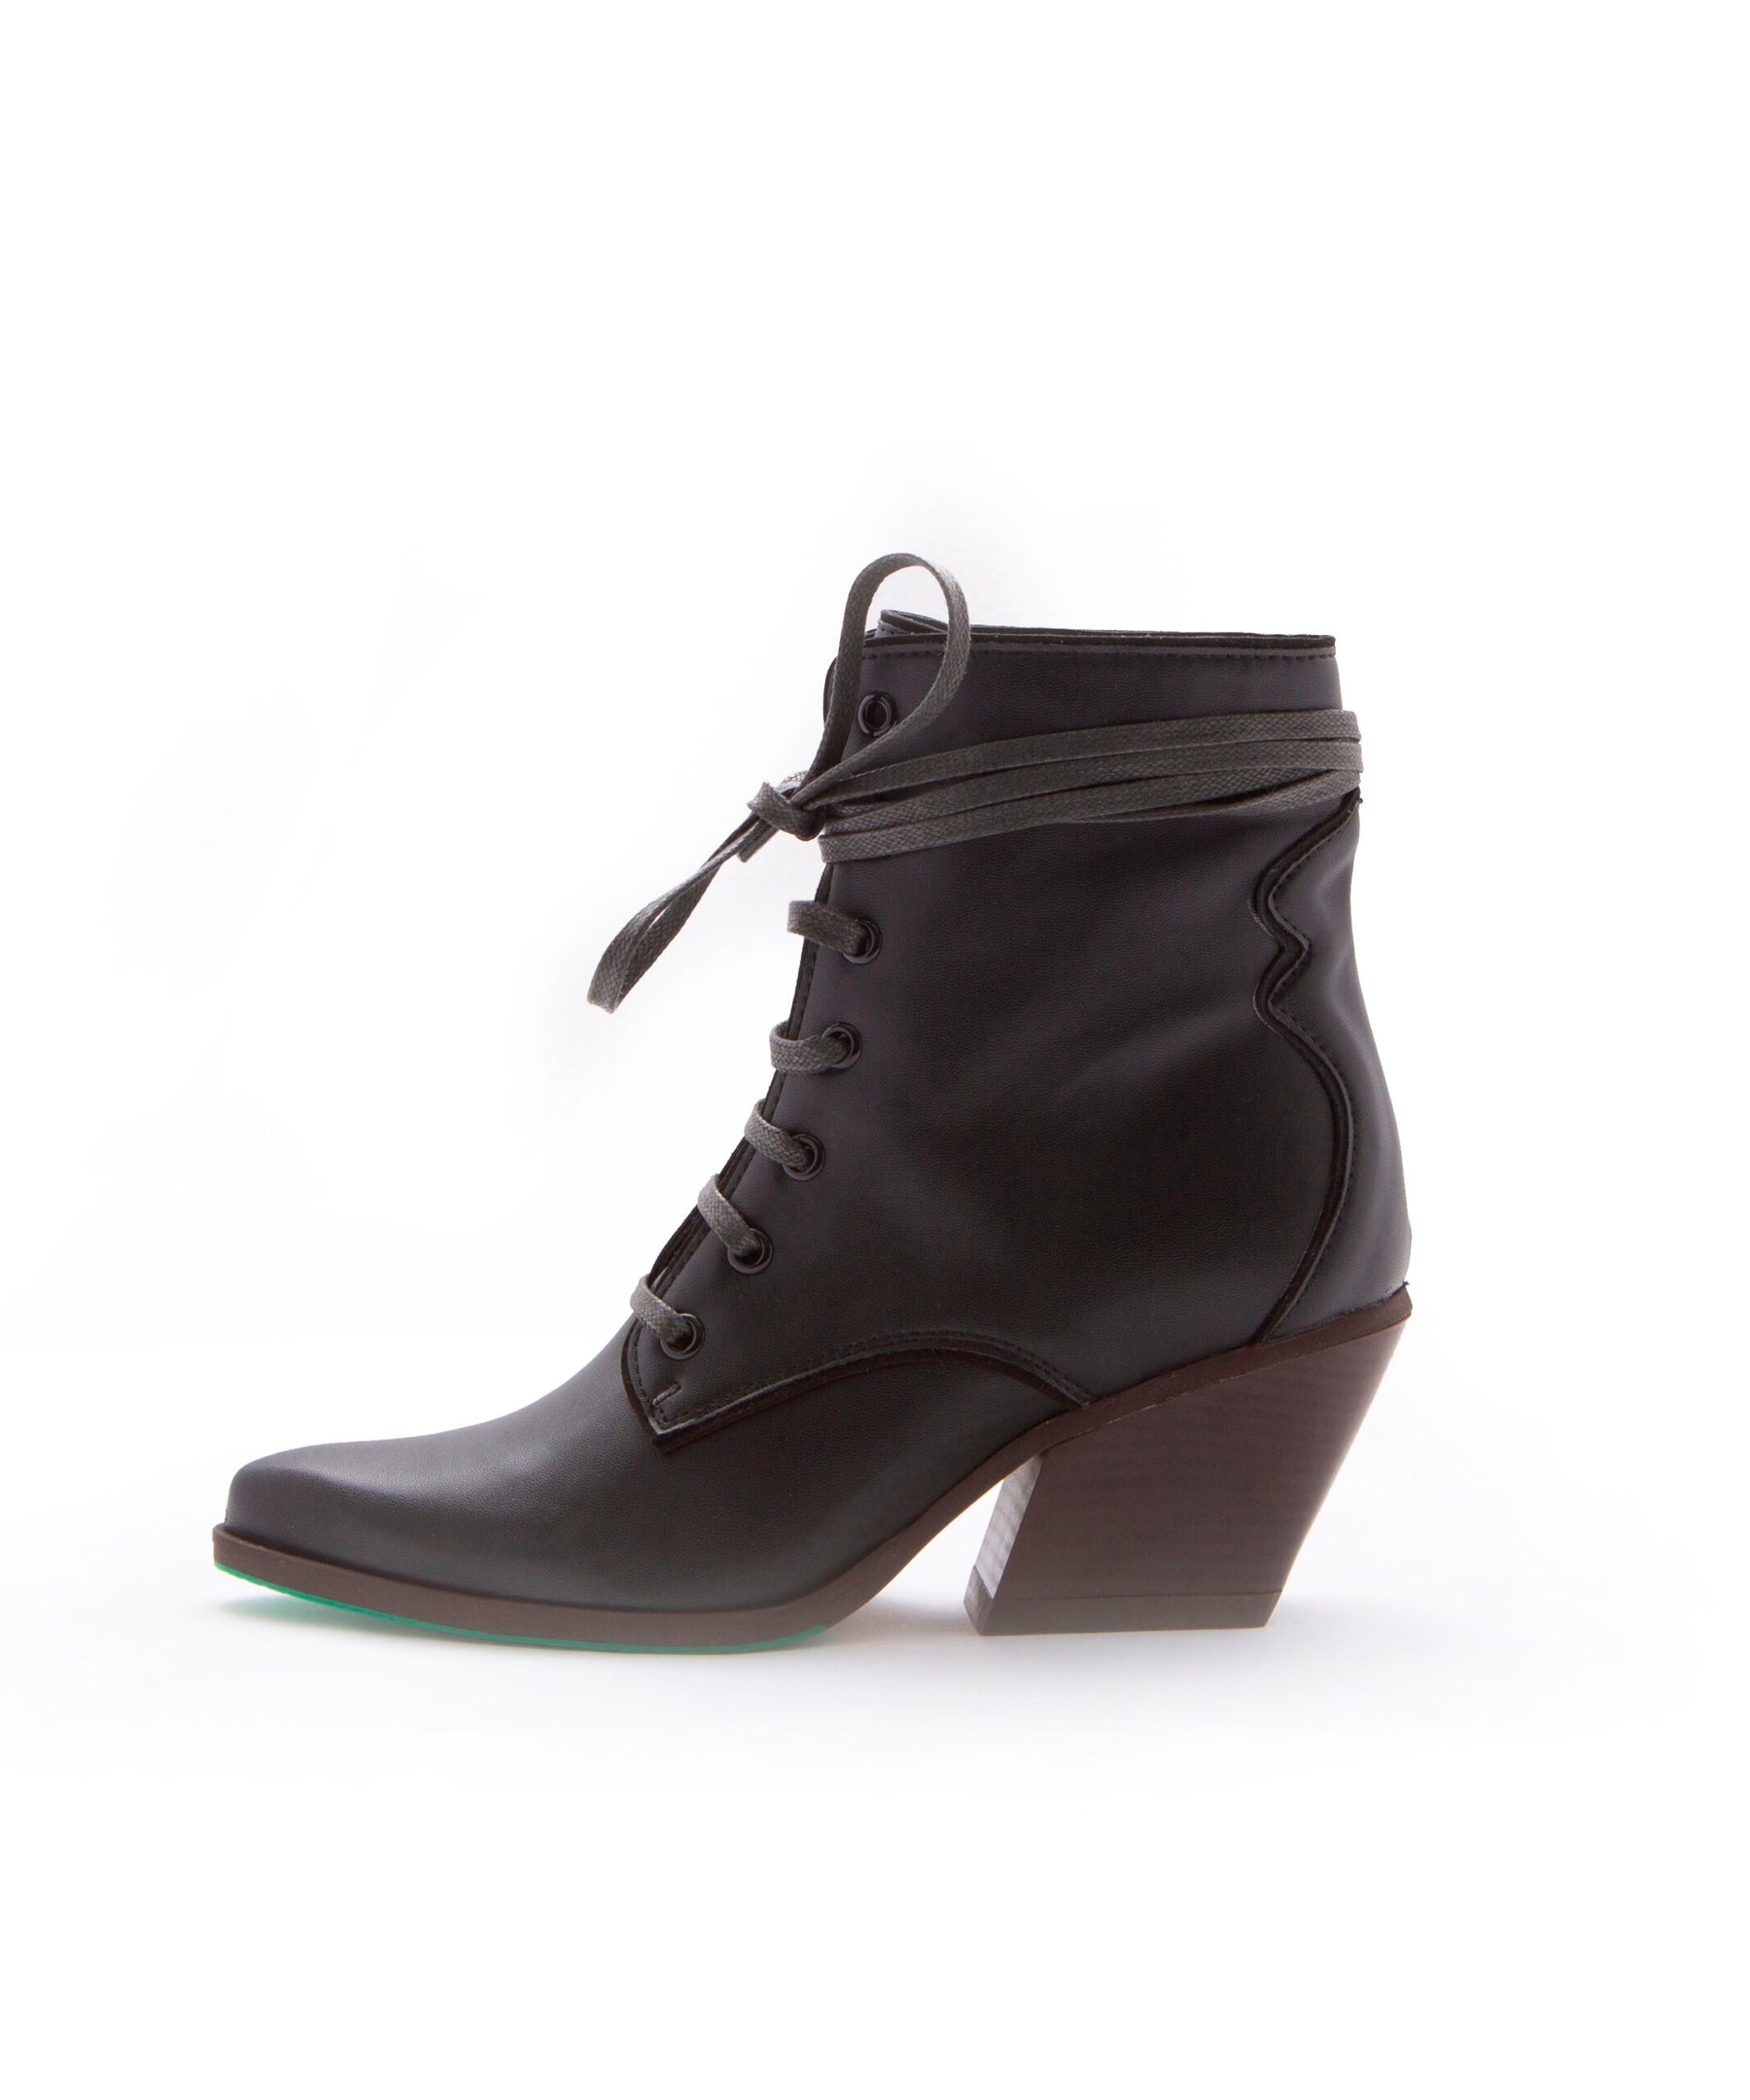 vegan leather black ankle boots with laces